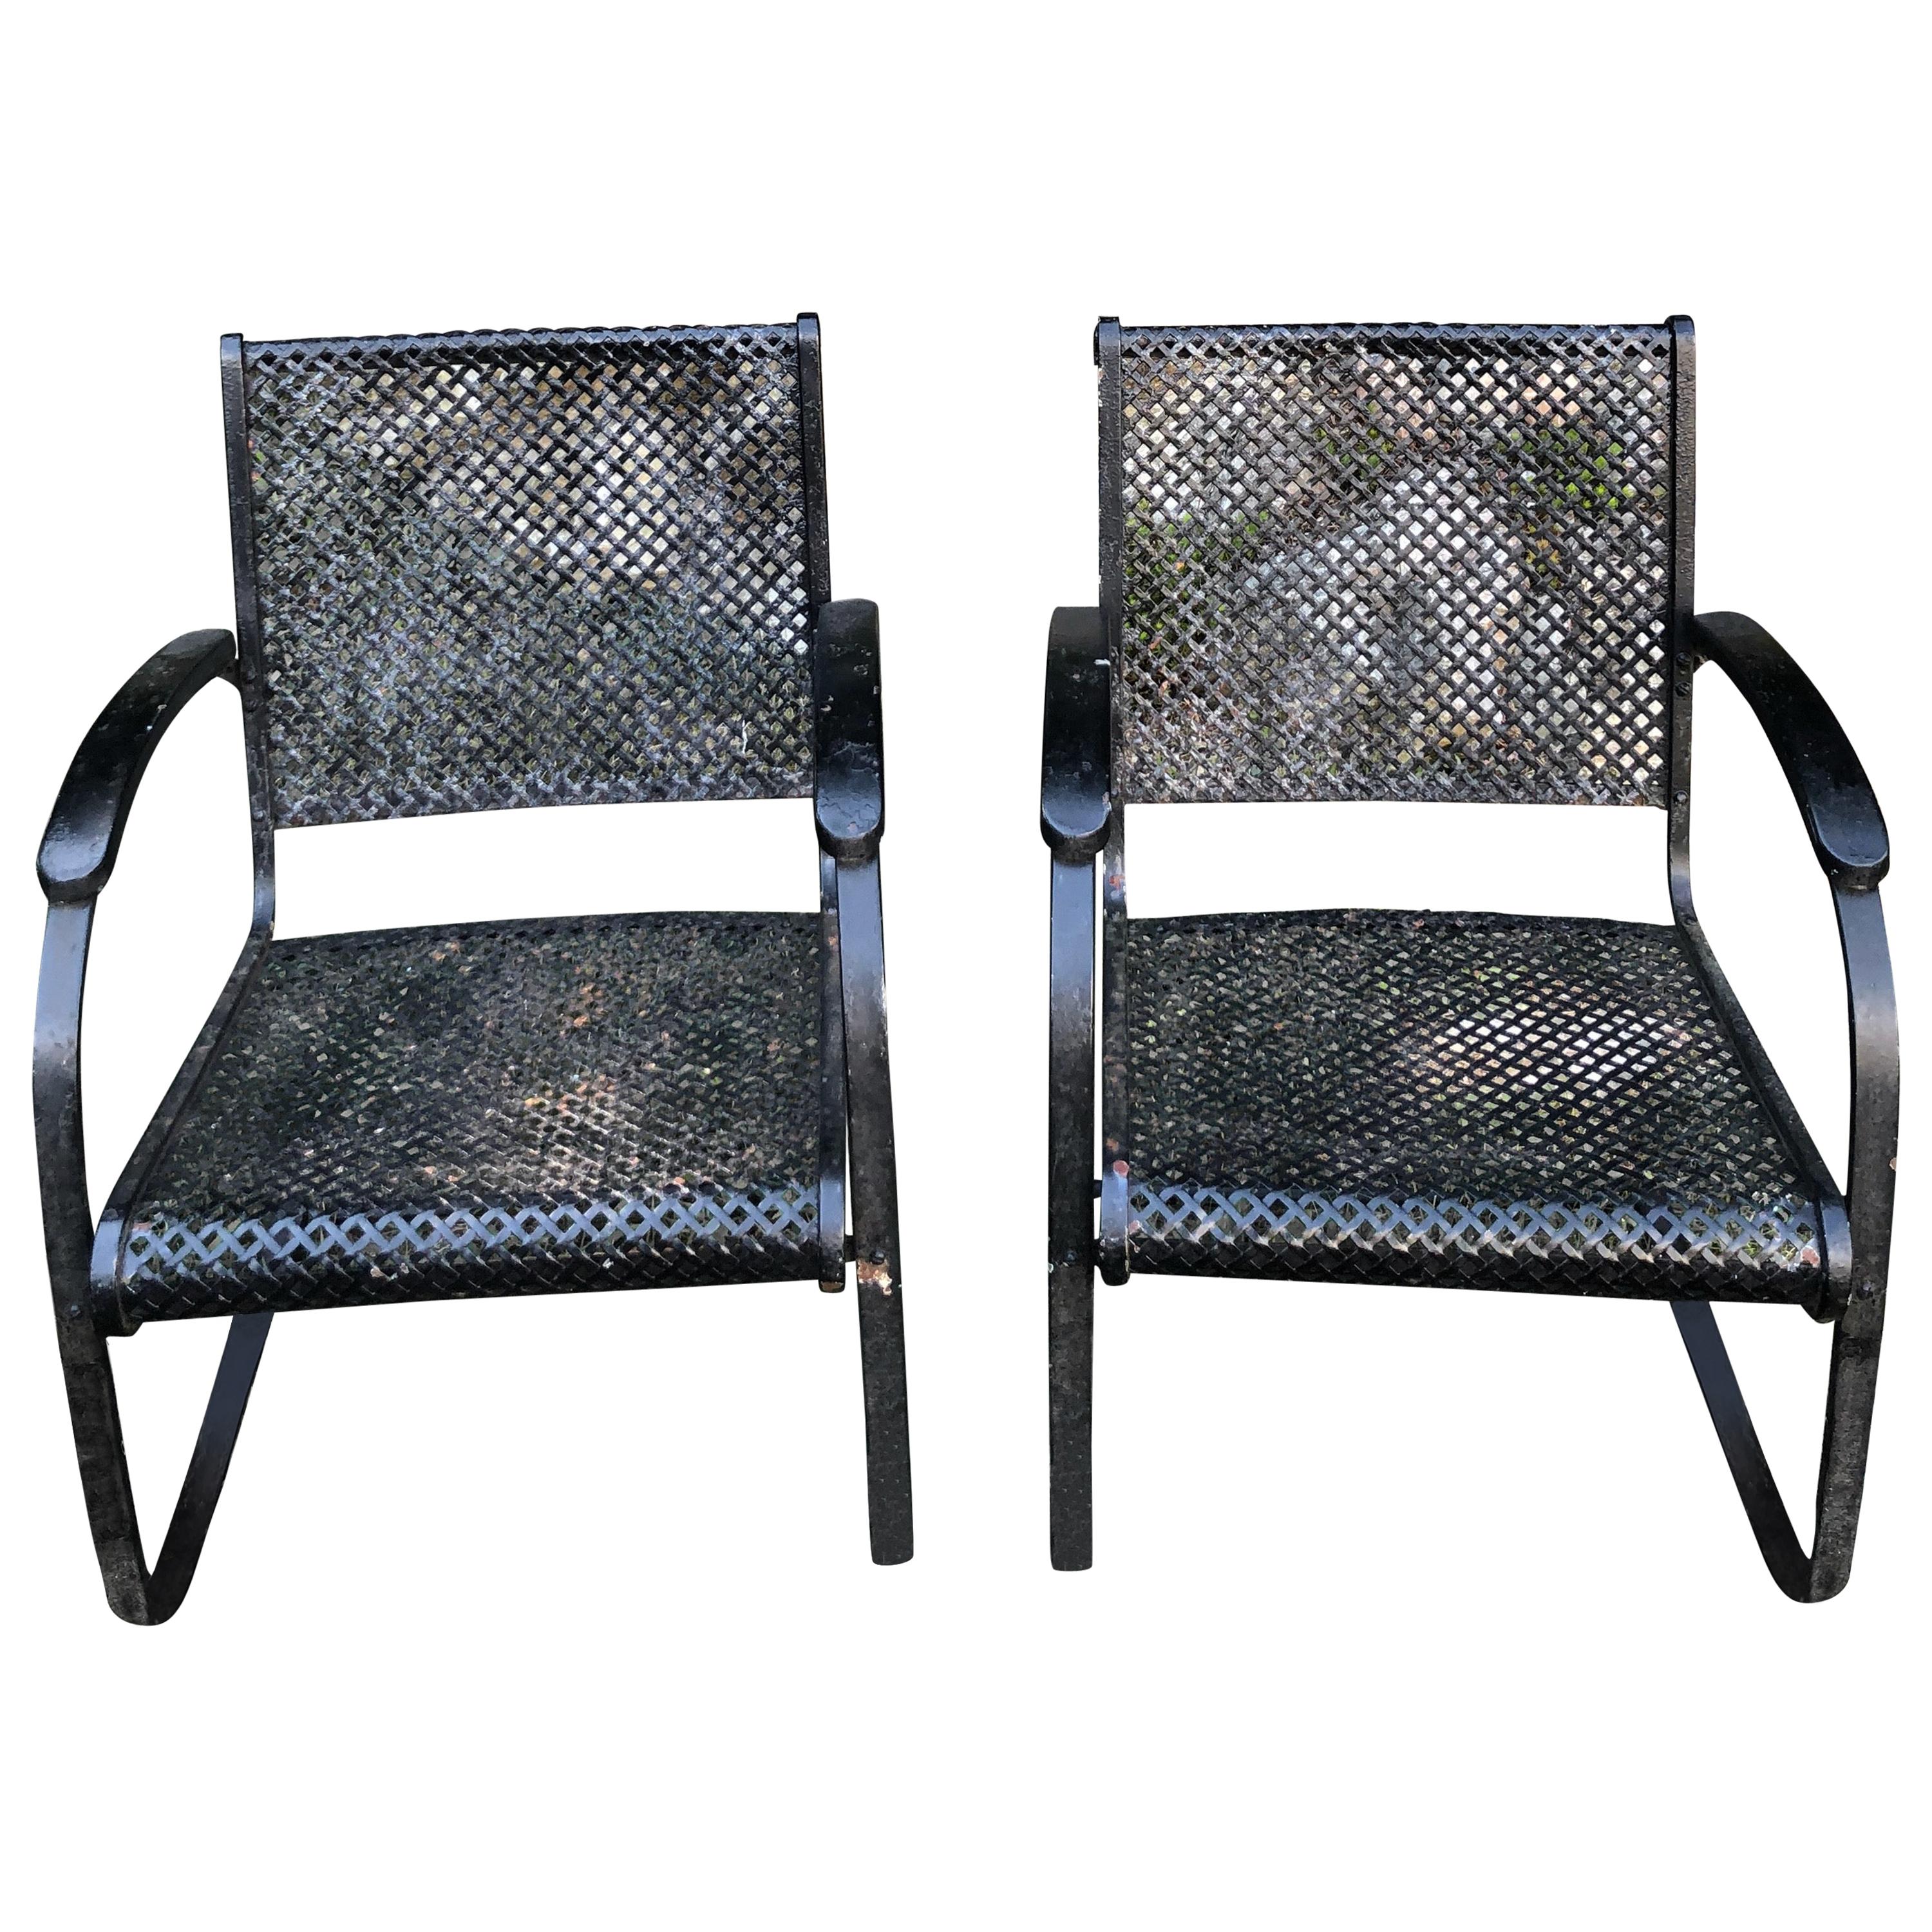 Pair of Heavy Iron Cantilever Garden Chairs from the 1930s